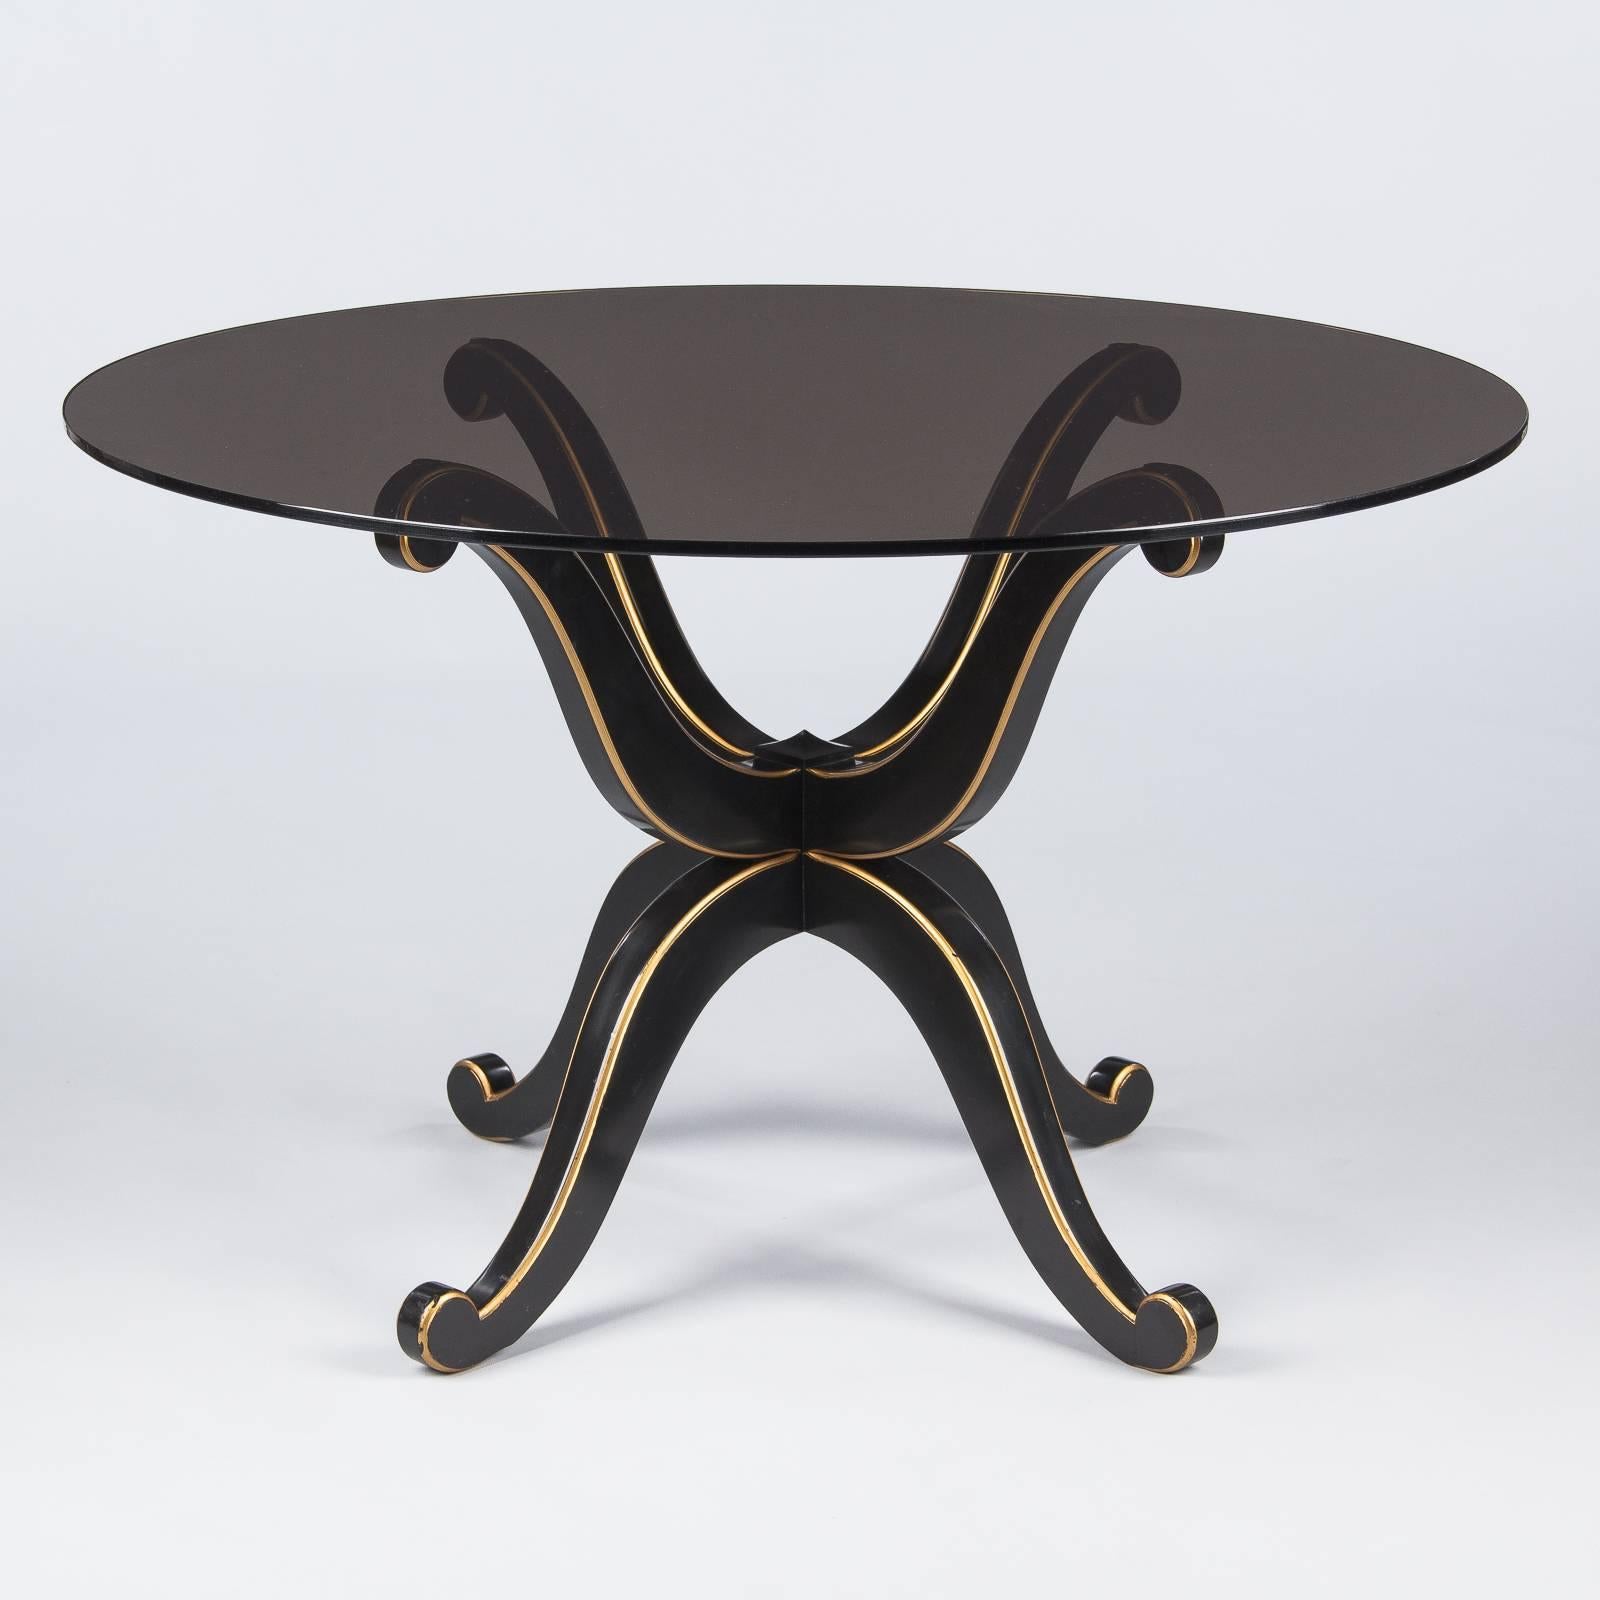 Varnished French Neoclassical Maurice Hirsch Glass Top Table with Ebonized Base, 1950s